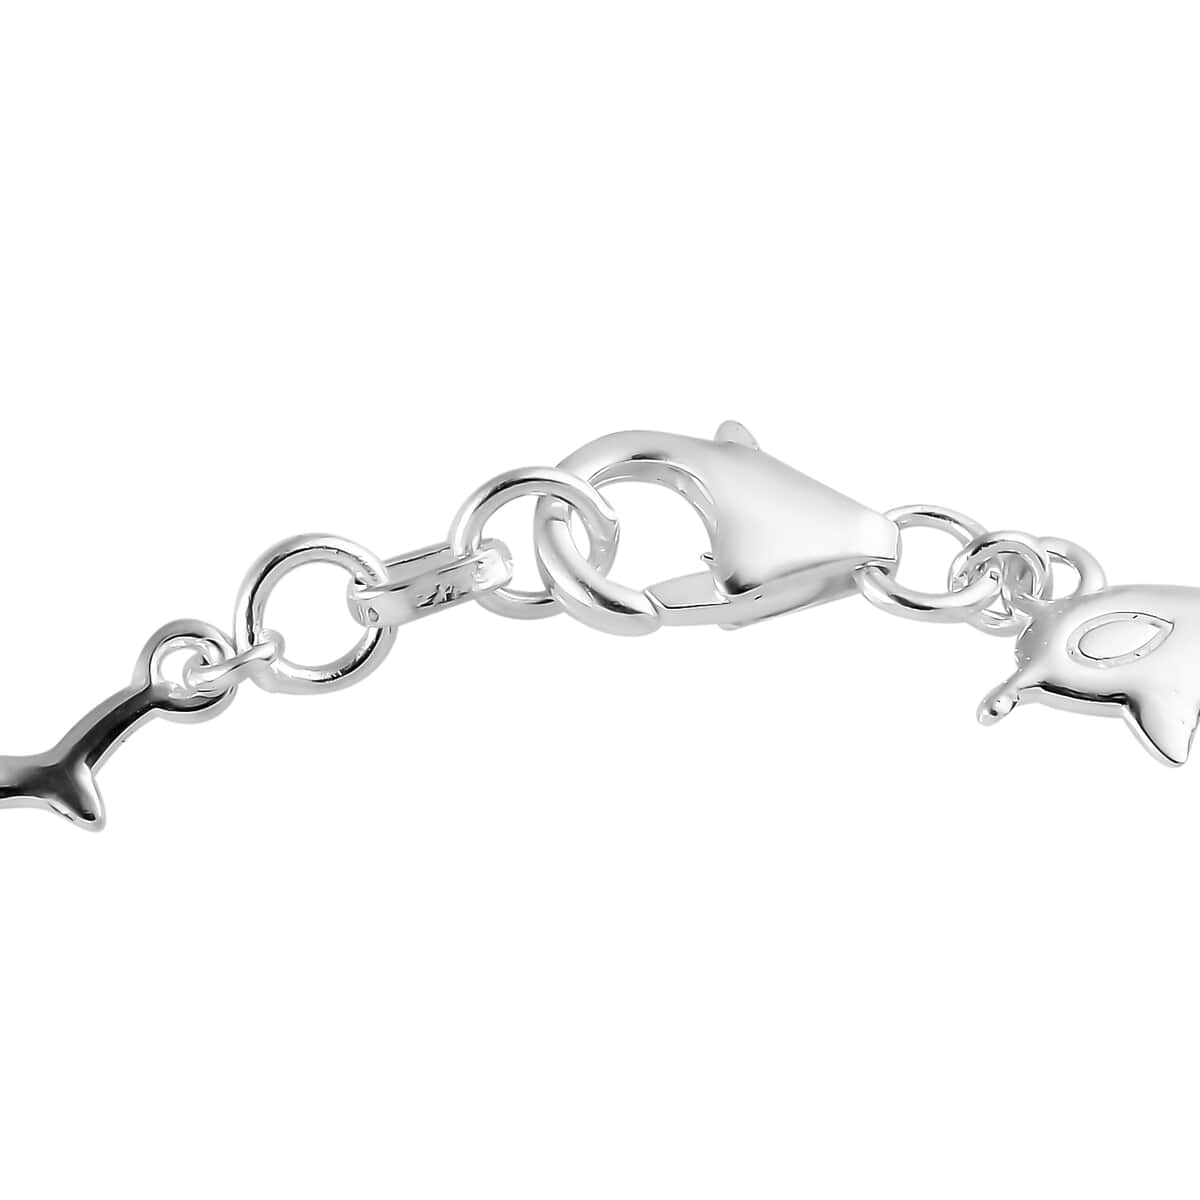 Dolphin Link Charm Bracelet For Women in Sterling Silver, Ocean Jewelry Beach Gifts Size 7.25 Inches (7.25 In) image number 5